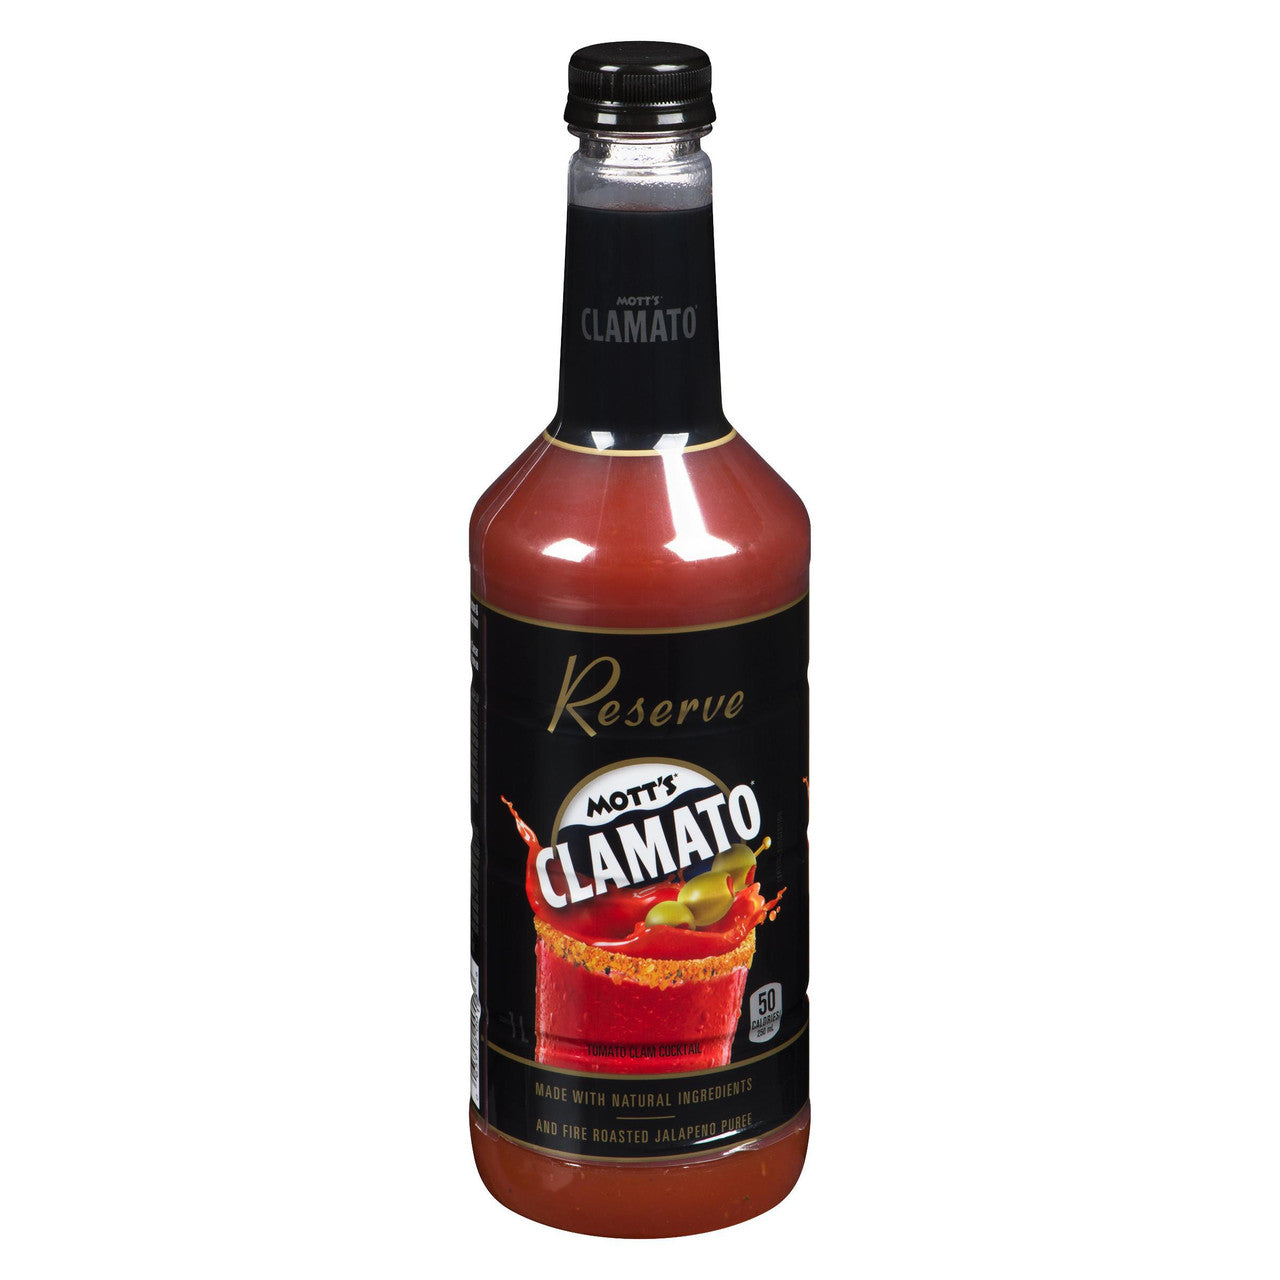 Mott's Clamato Reserve, Tomato Clam Caesar Cocktail, 1 L/35 fl.oz. Bottle {Imported from Canada}